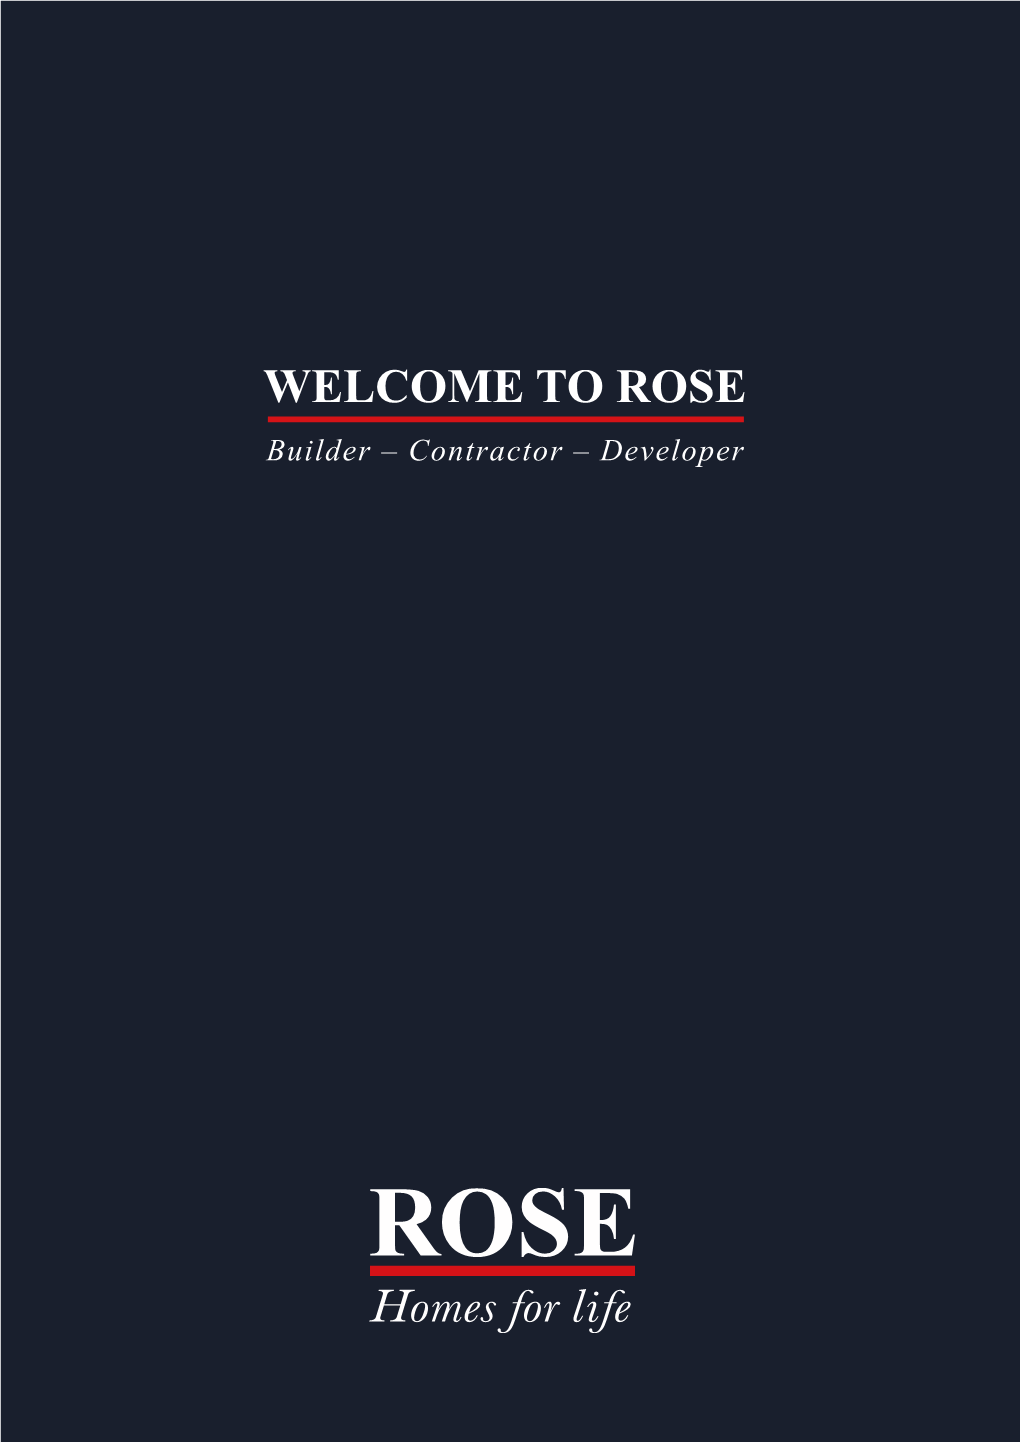 To Open Welcome to Rose Brochure